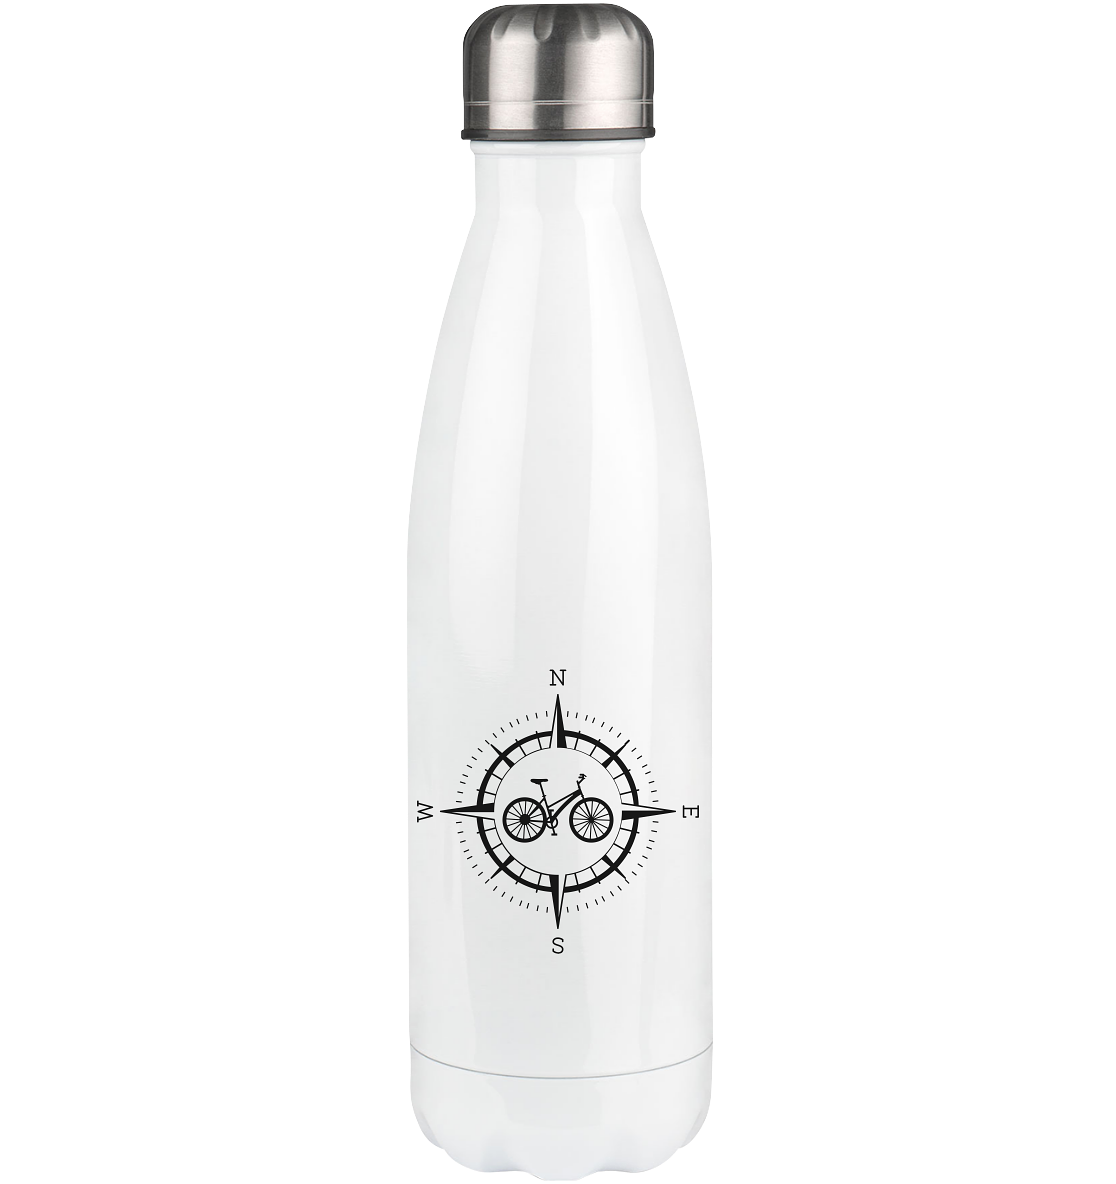 Compass and Bicycle - Edelstahl Thermosflasche fahrrad 500ml